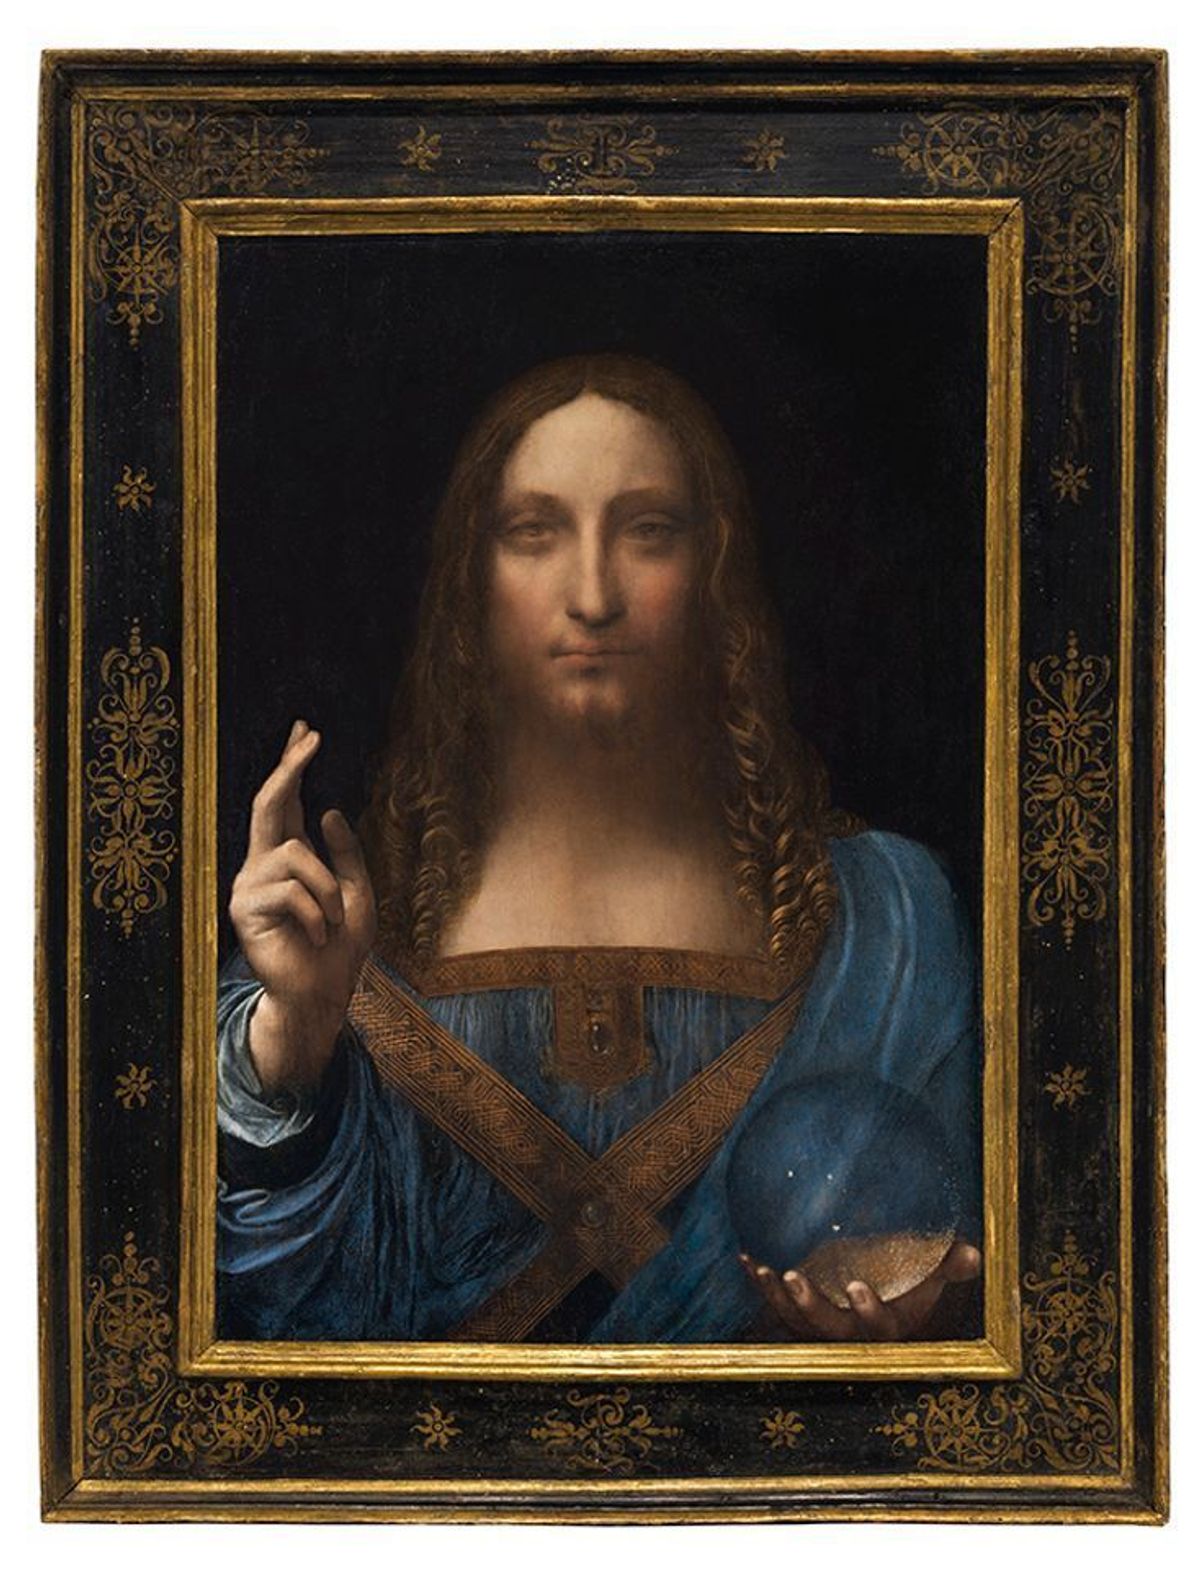 According to the book, when the National Gallery director Nicholas Penny came to see Leonardo’s Salvator Mundi it took him a "nanosecond" to understand what he was looking at 